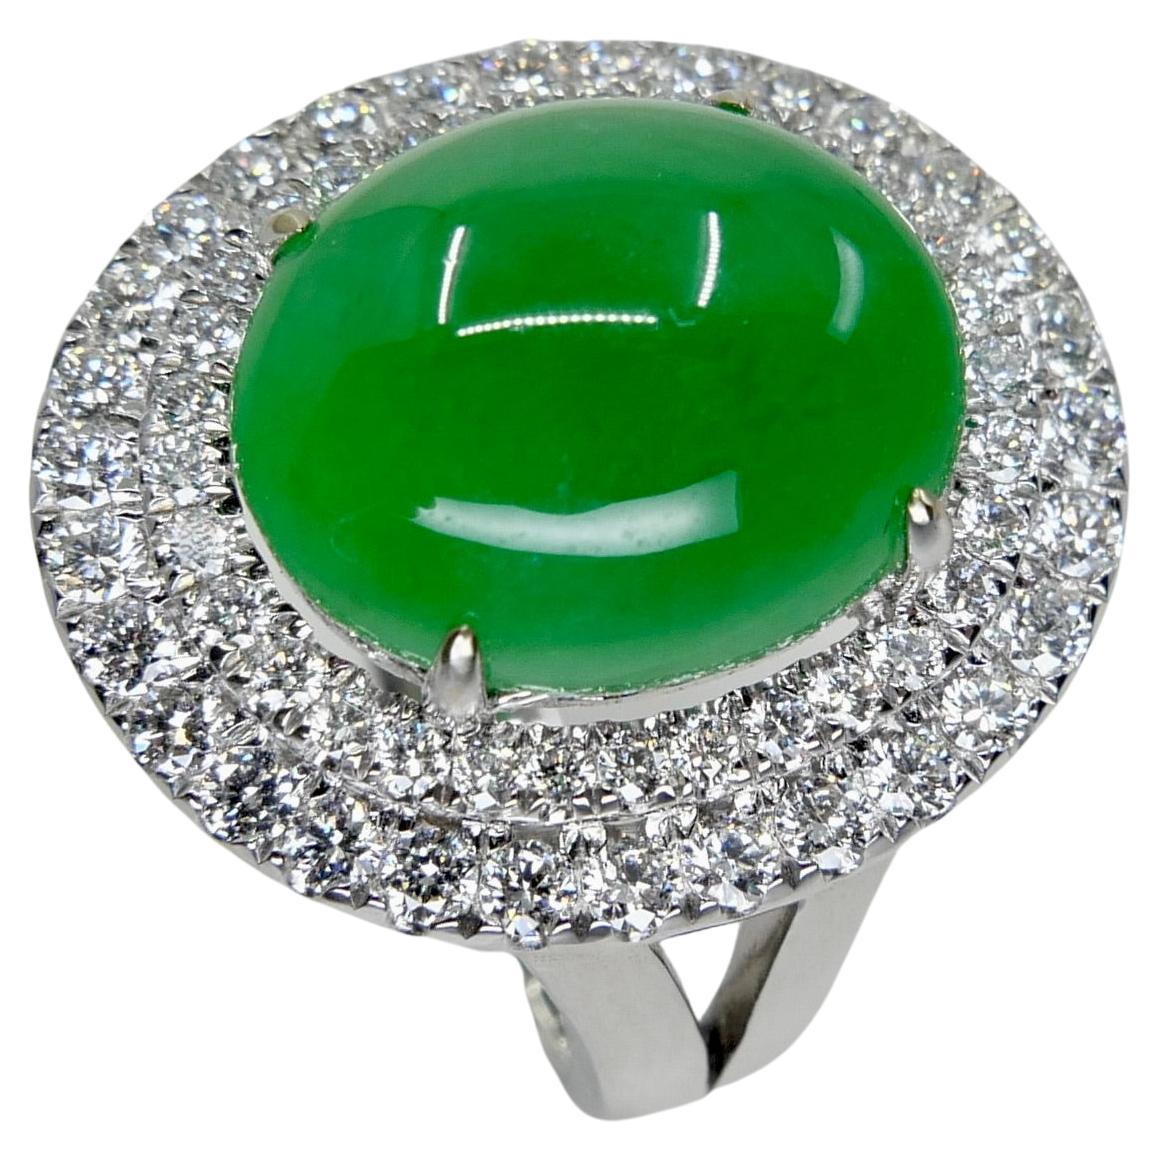 Cabochon Certified 6.71 Cts Jade & Diamond Cocktail Ring. XXL. Apple Green With High Dome For Sale